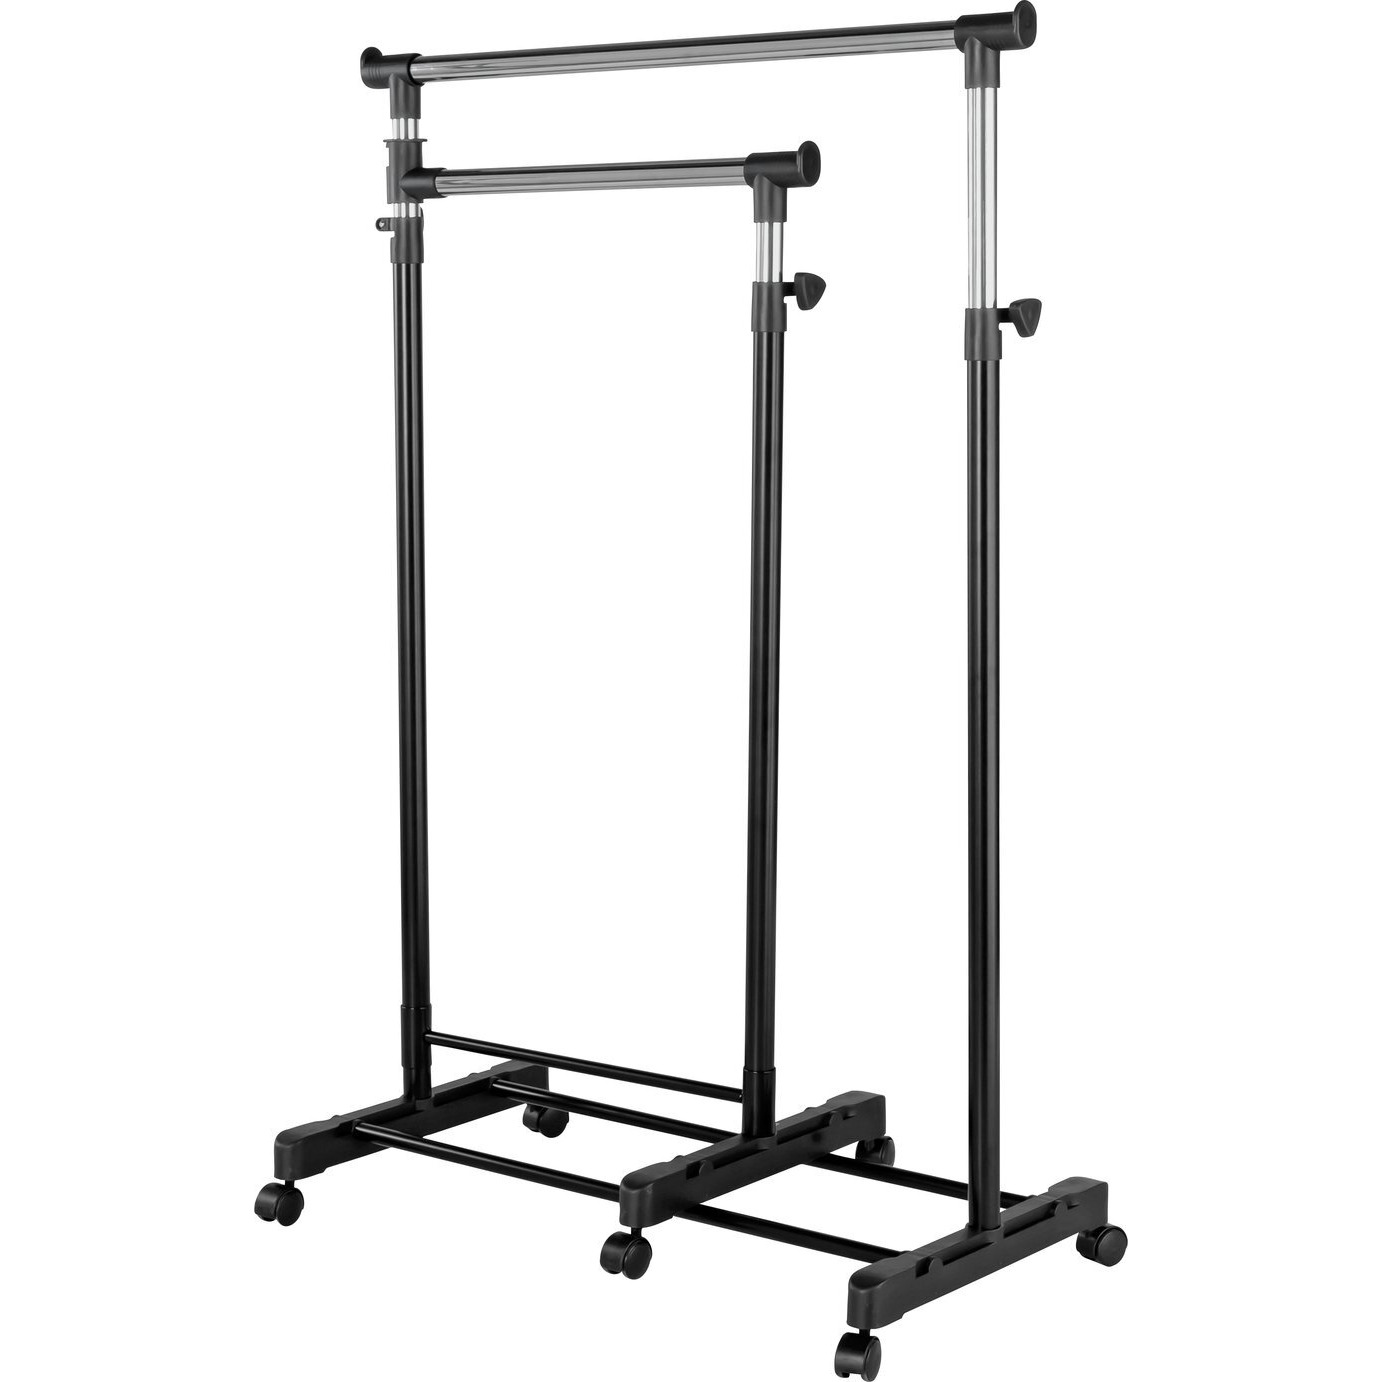 Argos Home Clothes Rail with Lower Swing Out Rail - Black - image 1